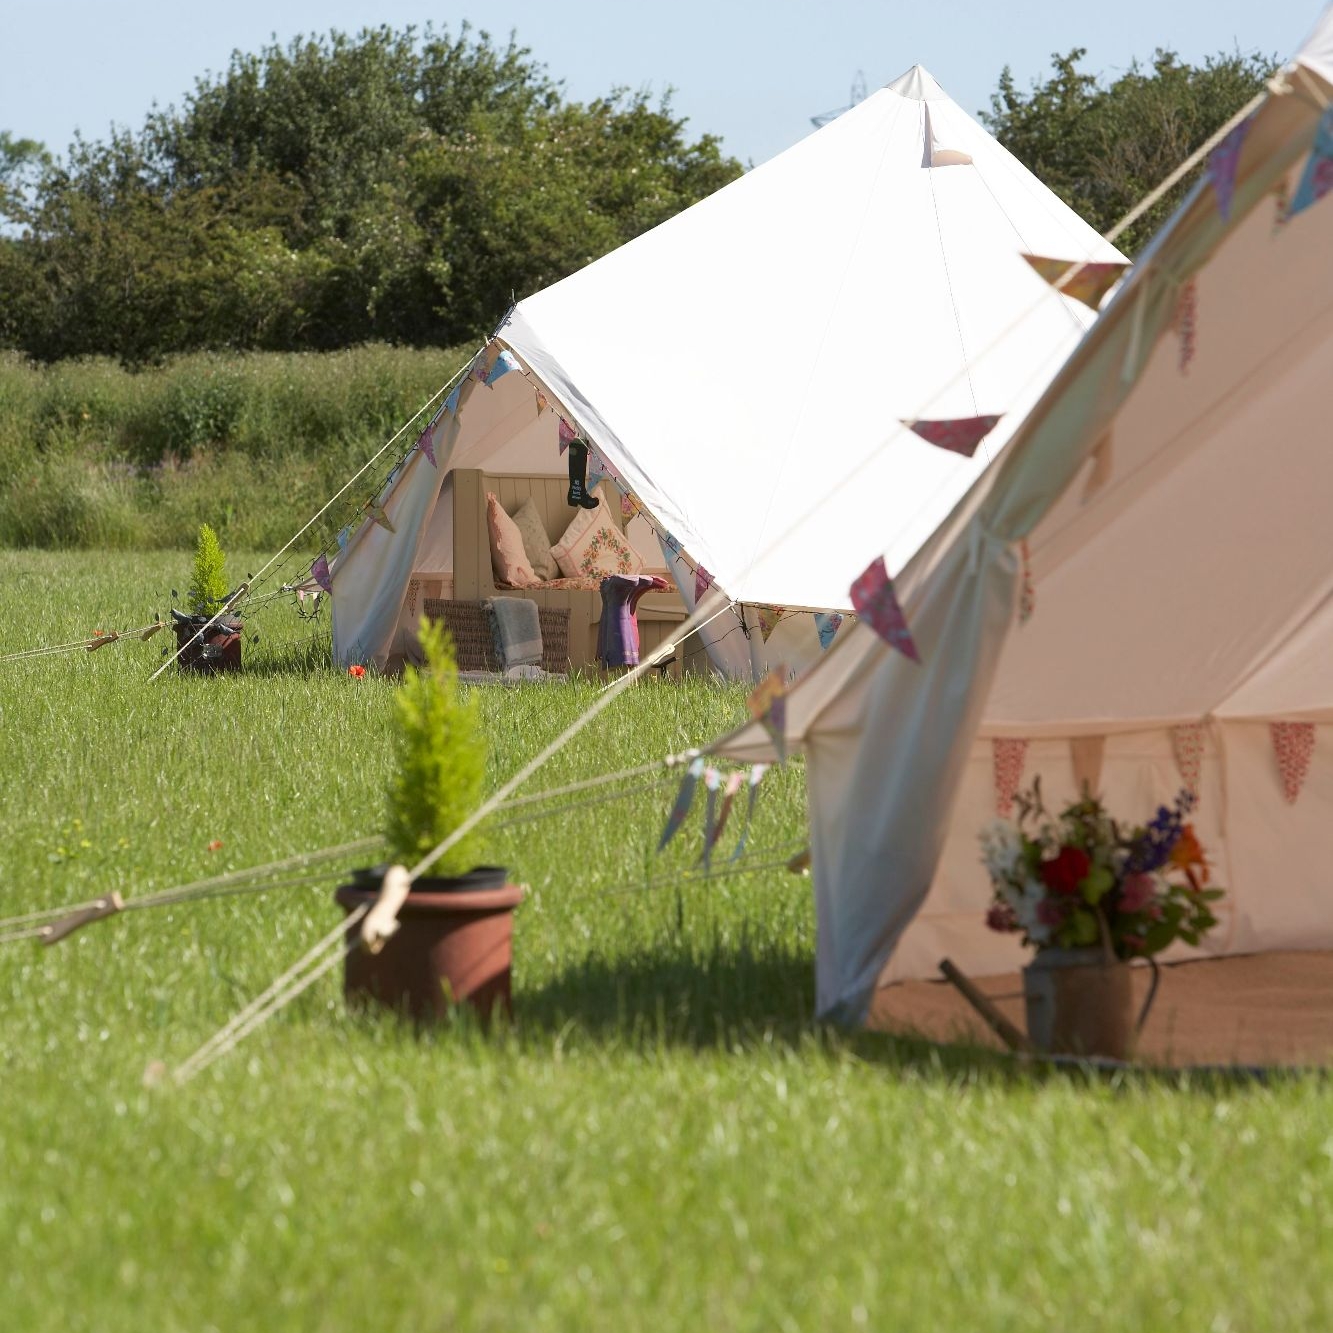 Oddhouse Farm Glamping bell tents